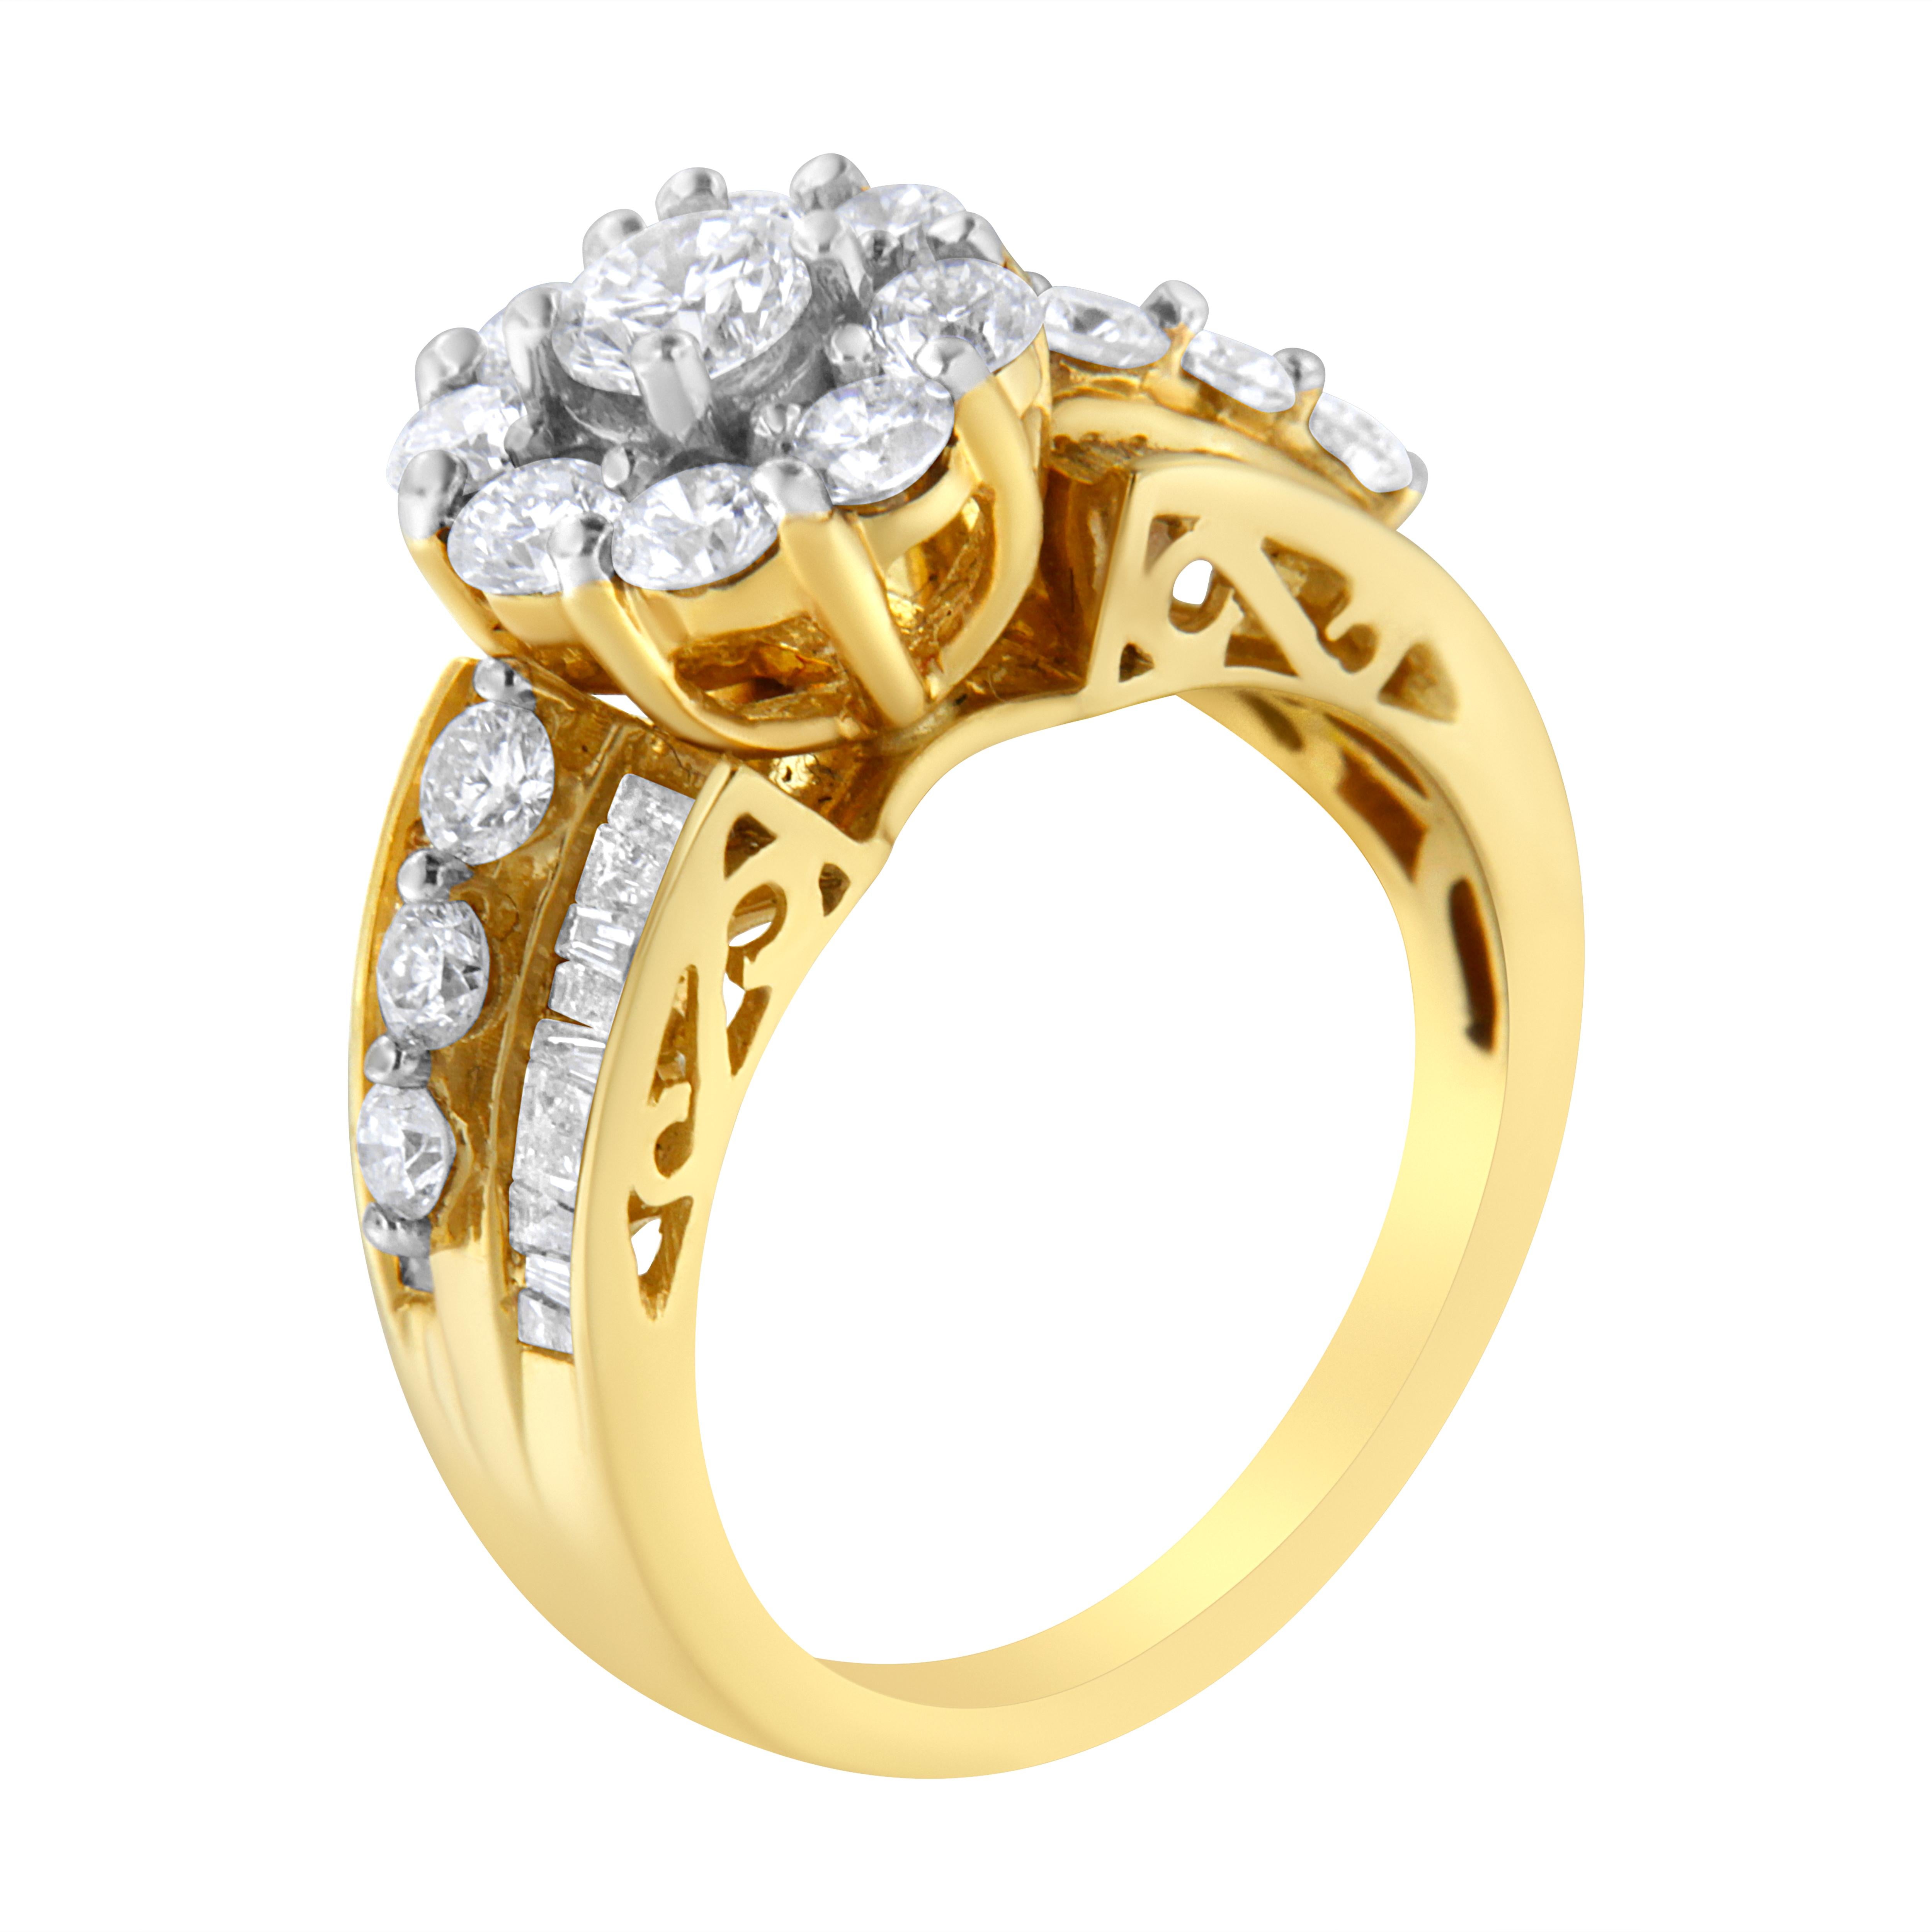 You will fall in love with this 14k yellow gold ring that showcases 2ct TDW of round and baguette diamonds. A round cut diamond composite creates a floral inspired central design. Glittering round diamonds run down either side of the band set in